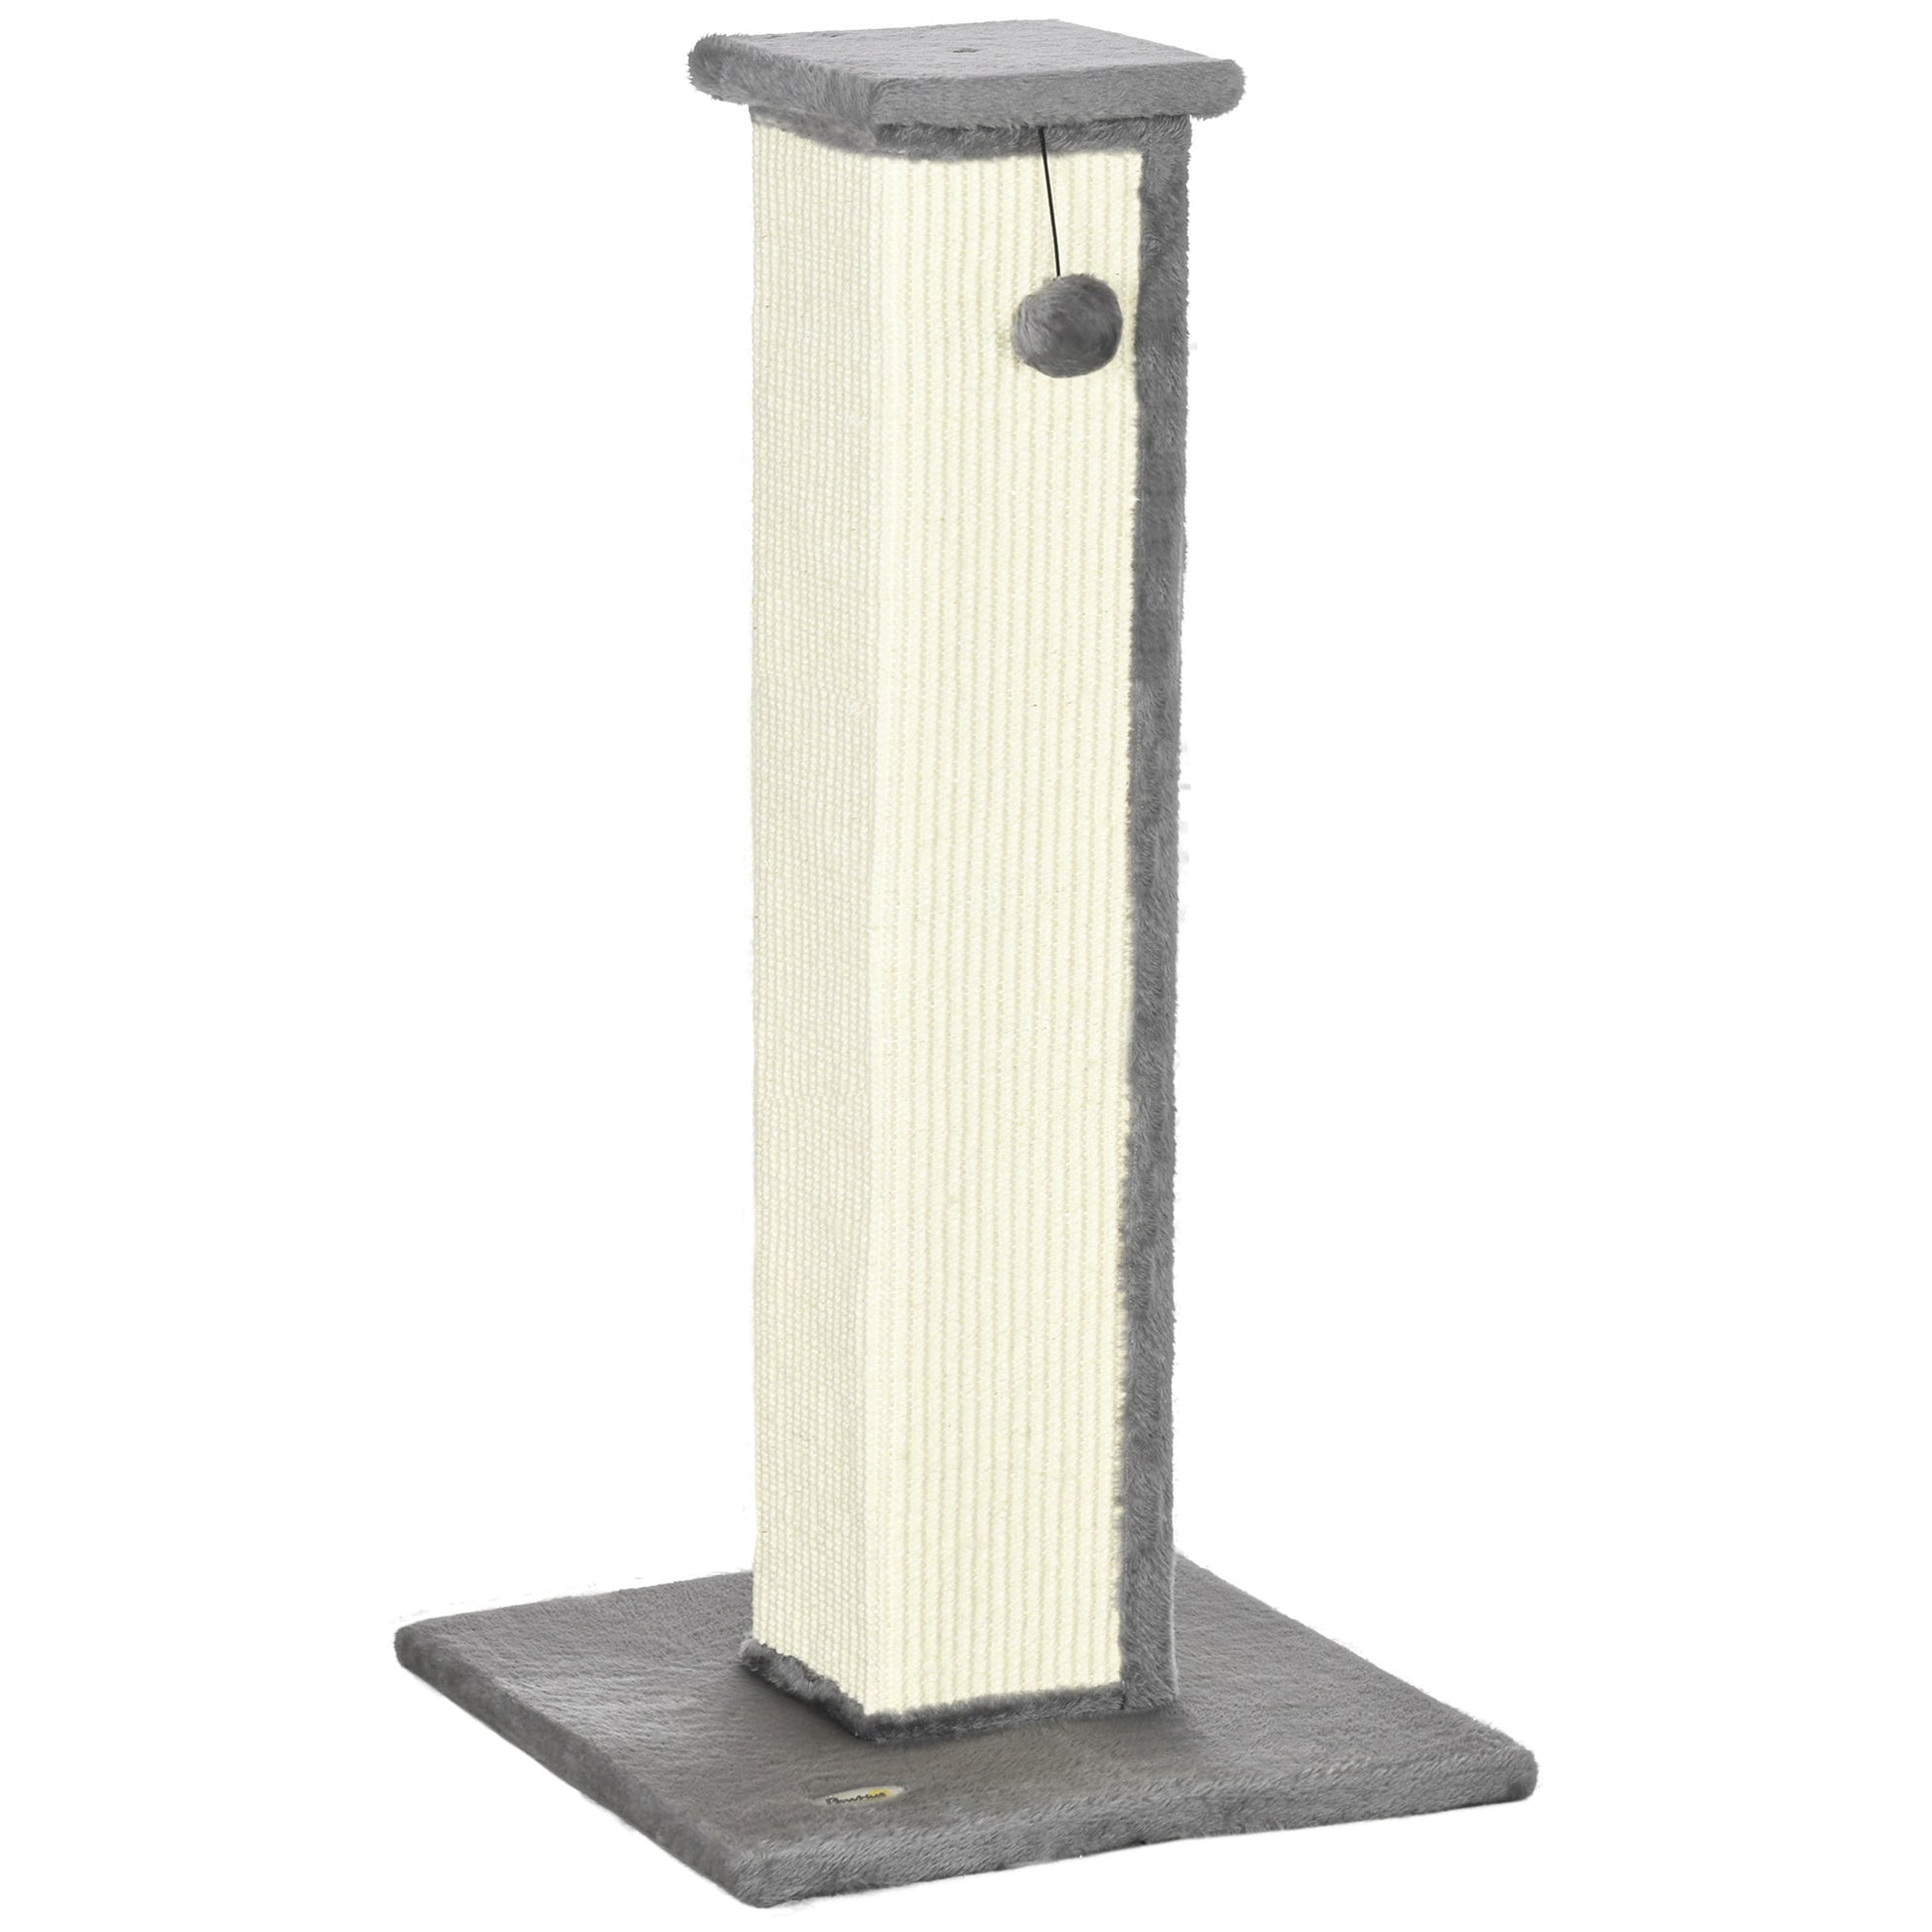 32" Tall Cat Scratching Post for Indoor Cats and Kittens, Sisal Cat Scratcher with Hanging Ball Soft Plush, Grey at Gallery Canada